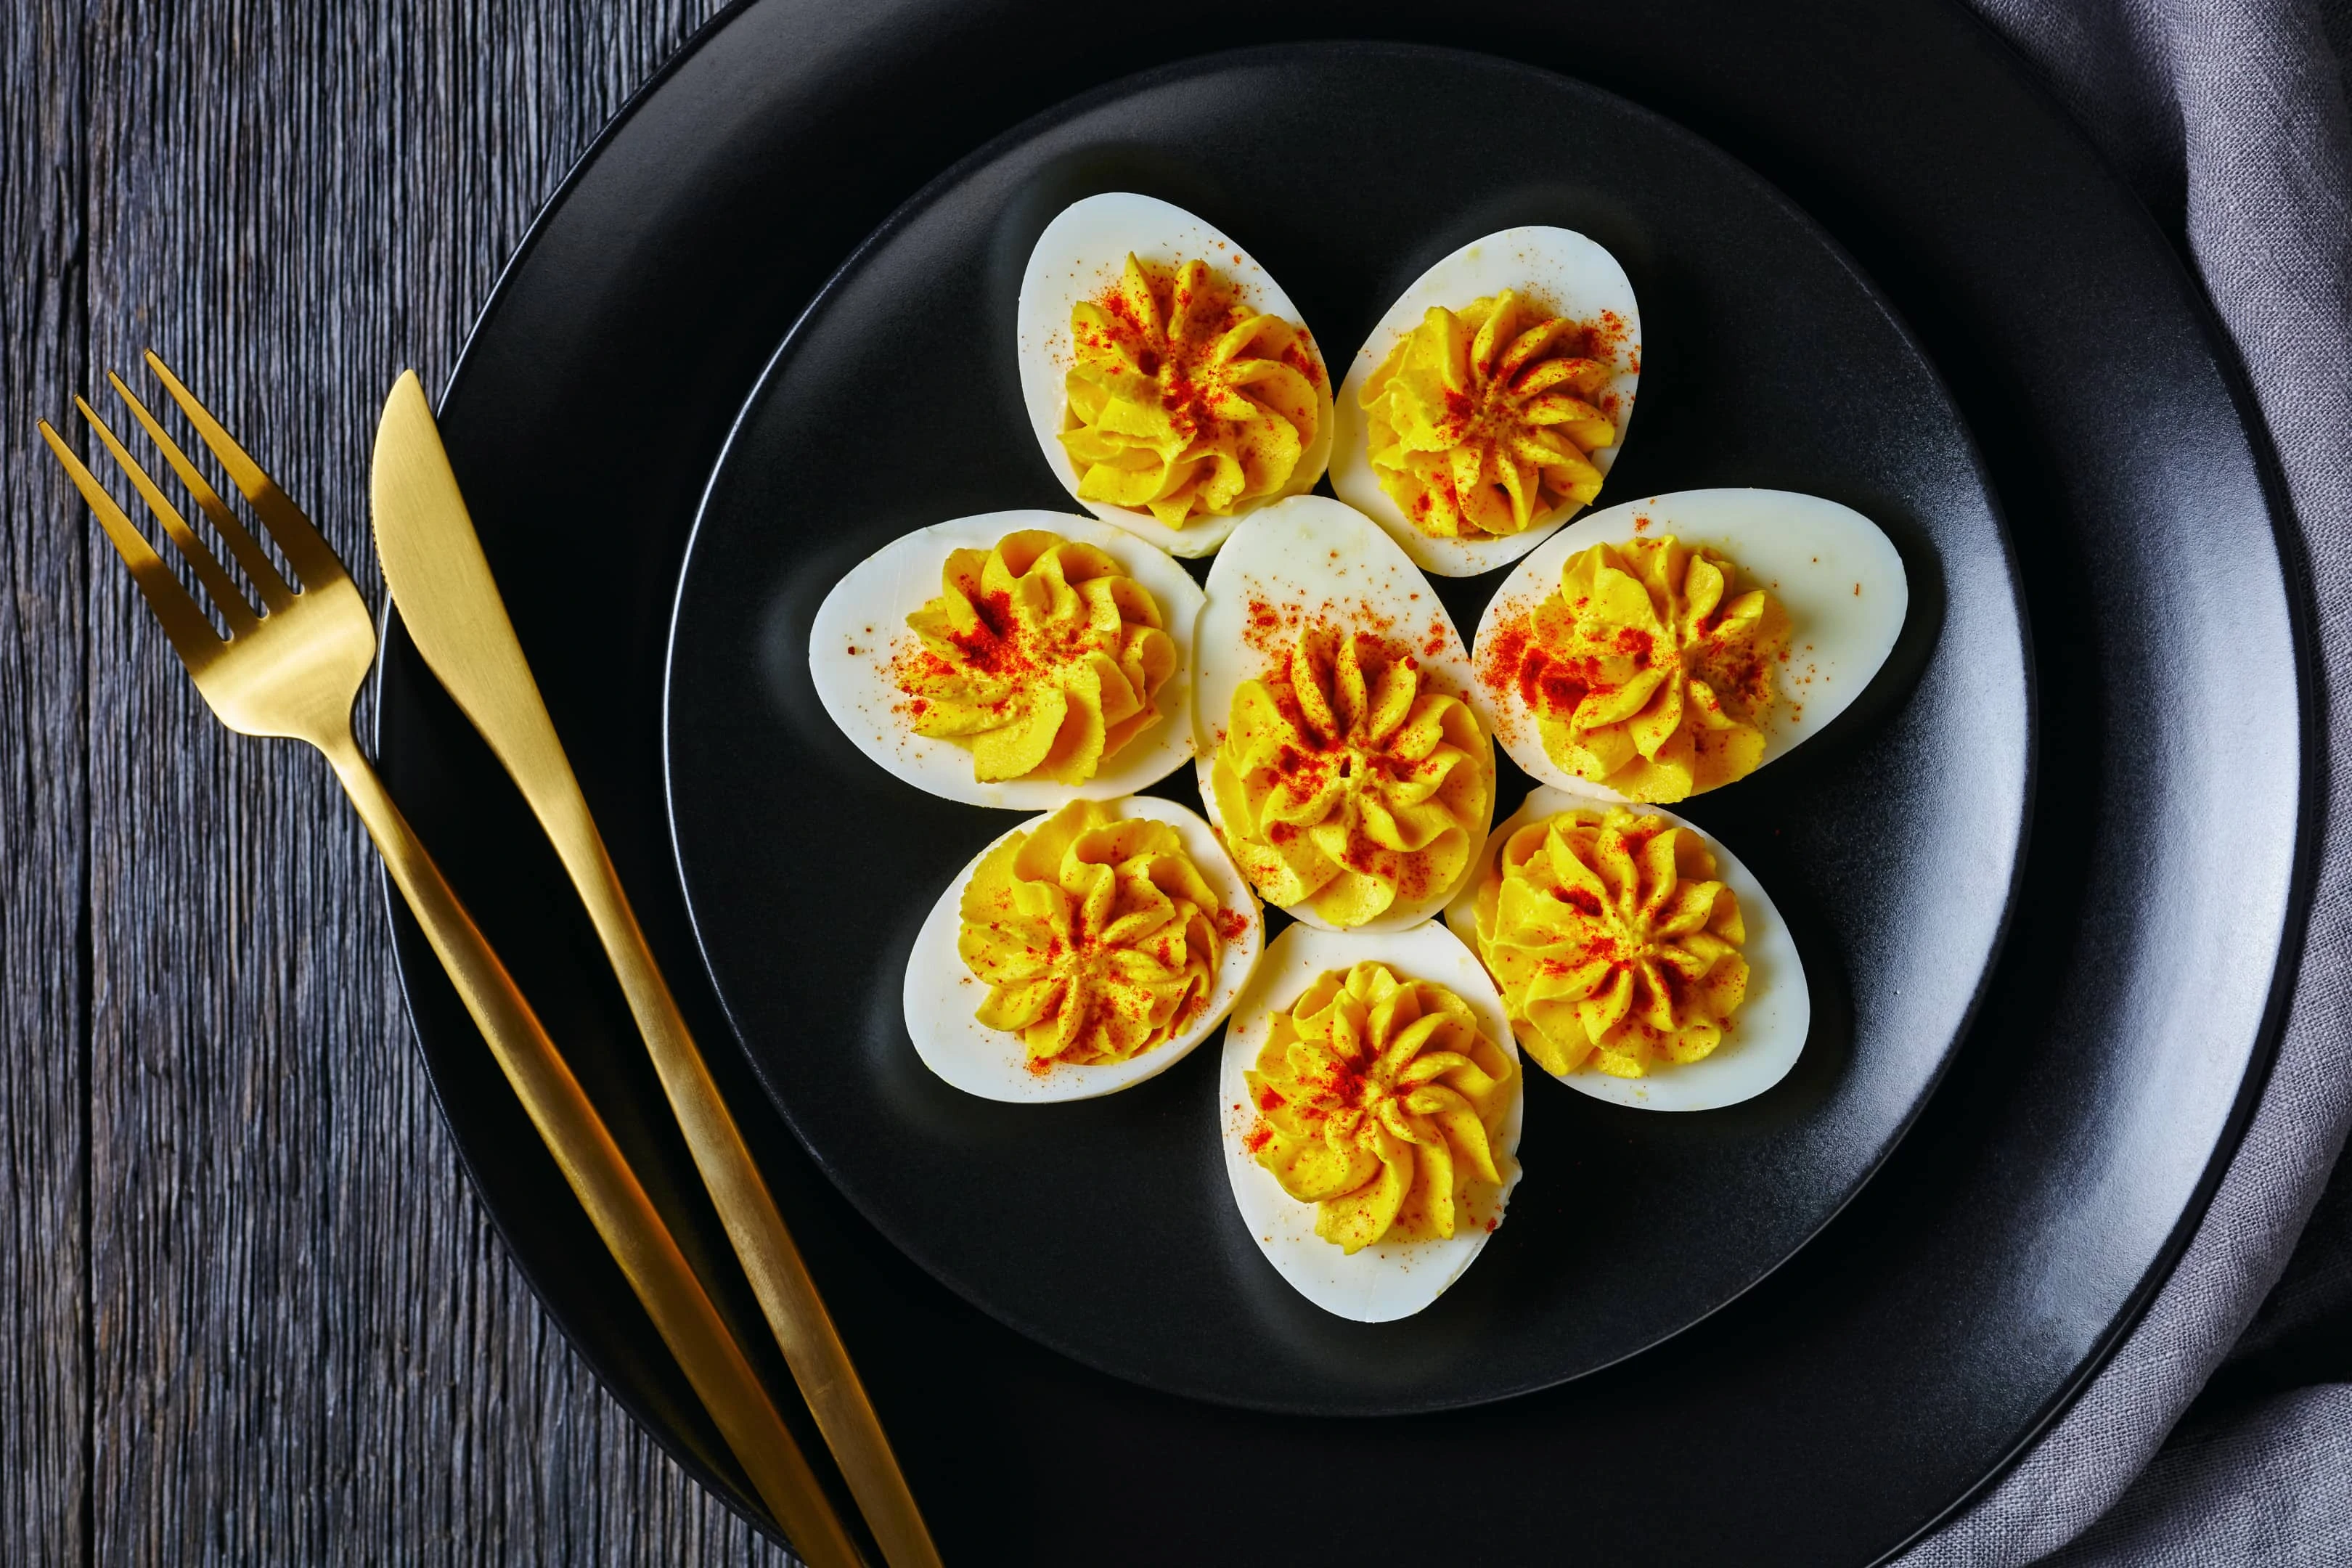 Classic deviled eggs filled with mustard mayonnaise white vinegar sprinkled with smoked paprika on black plate